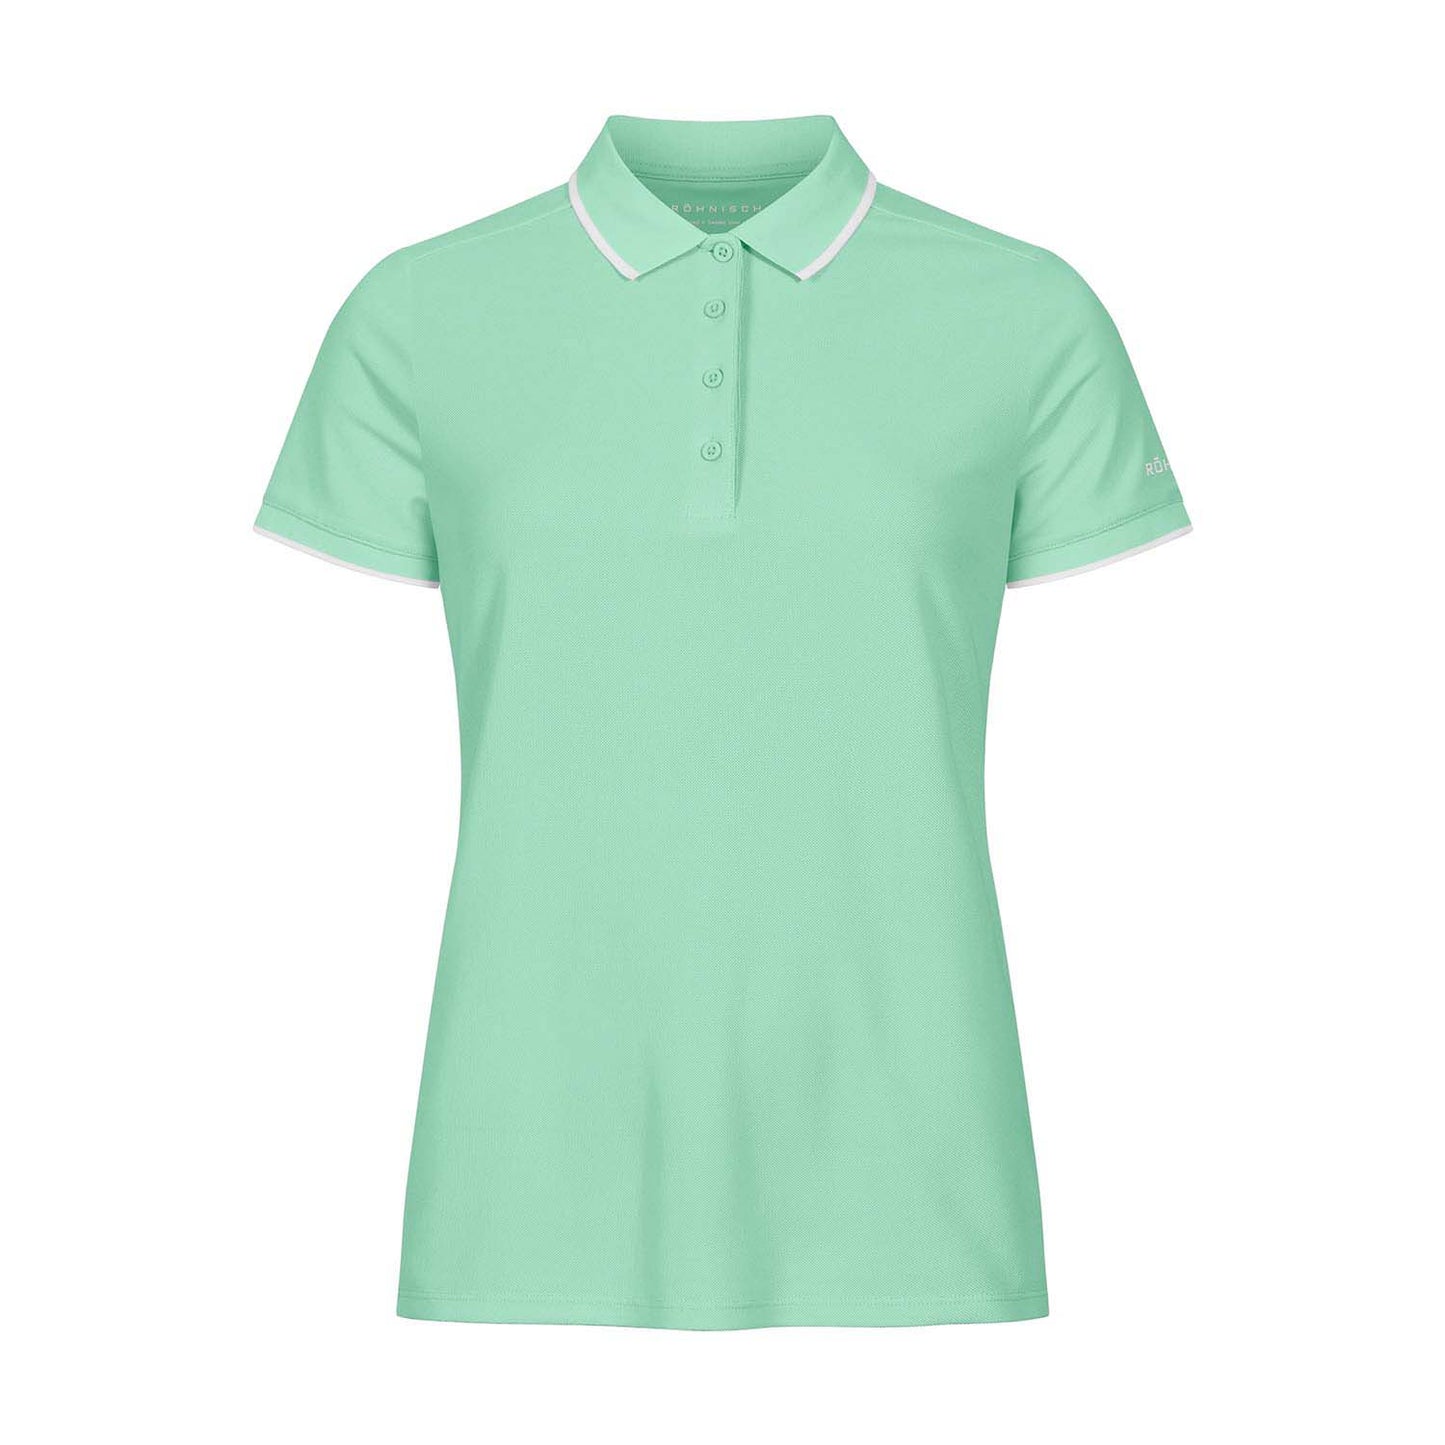 Rohnisch Ladies Classic Polo Shirt with Contrast Trim in Ice Green 